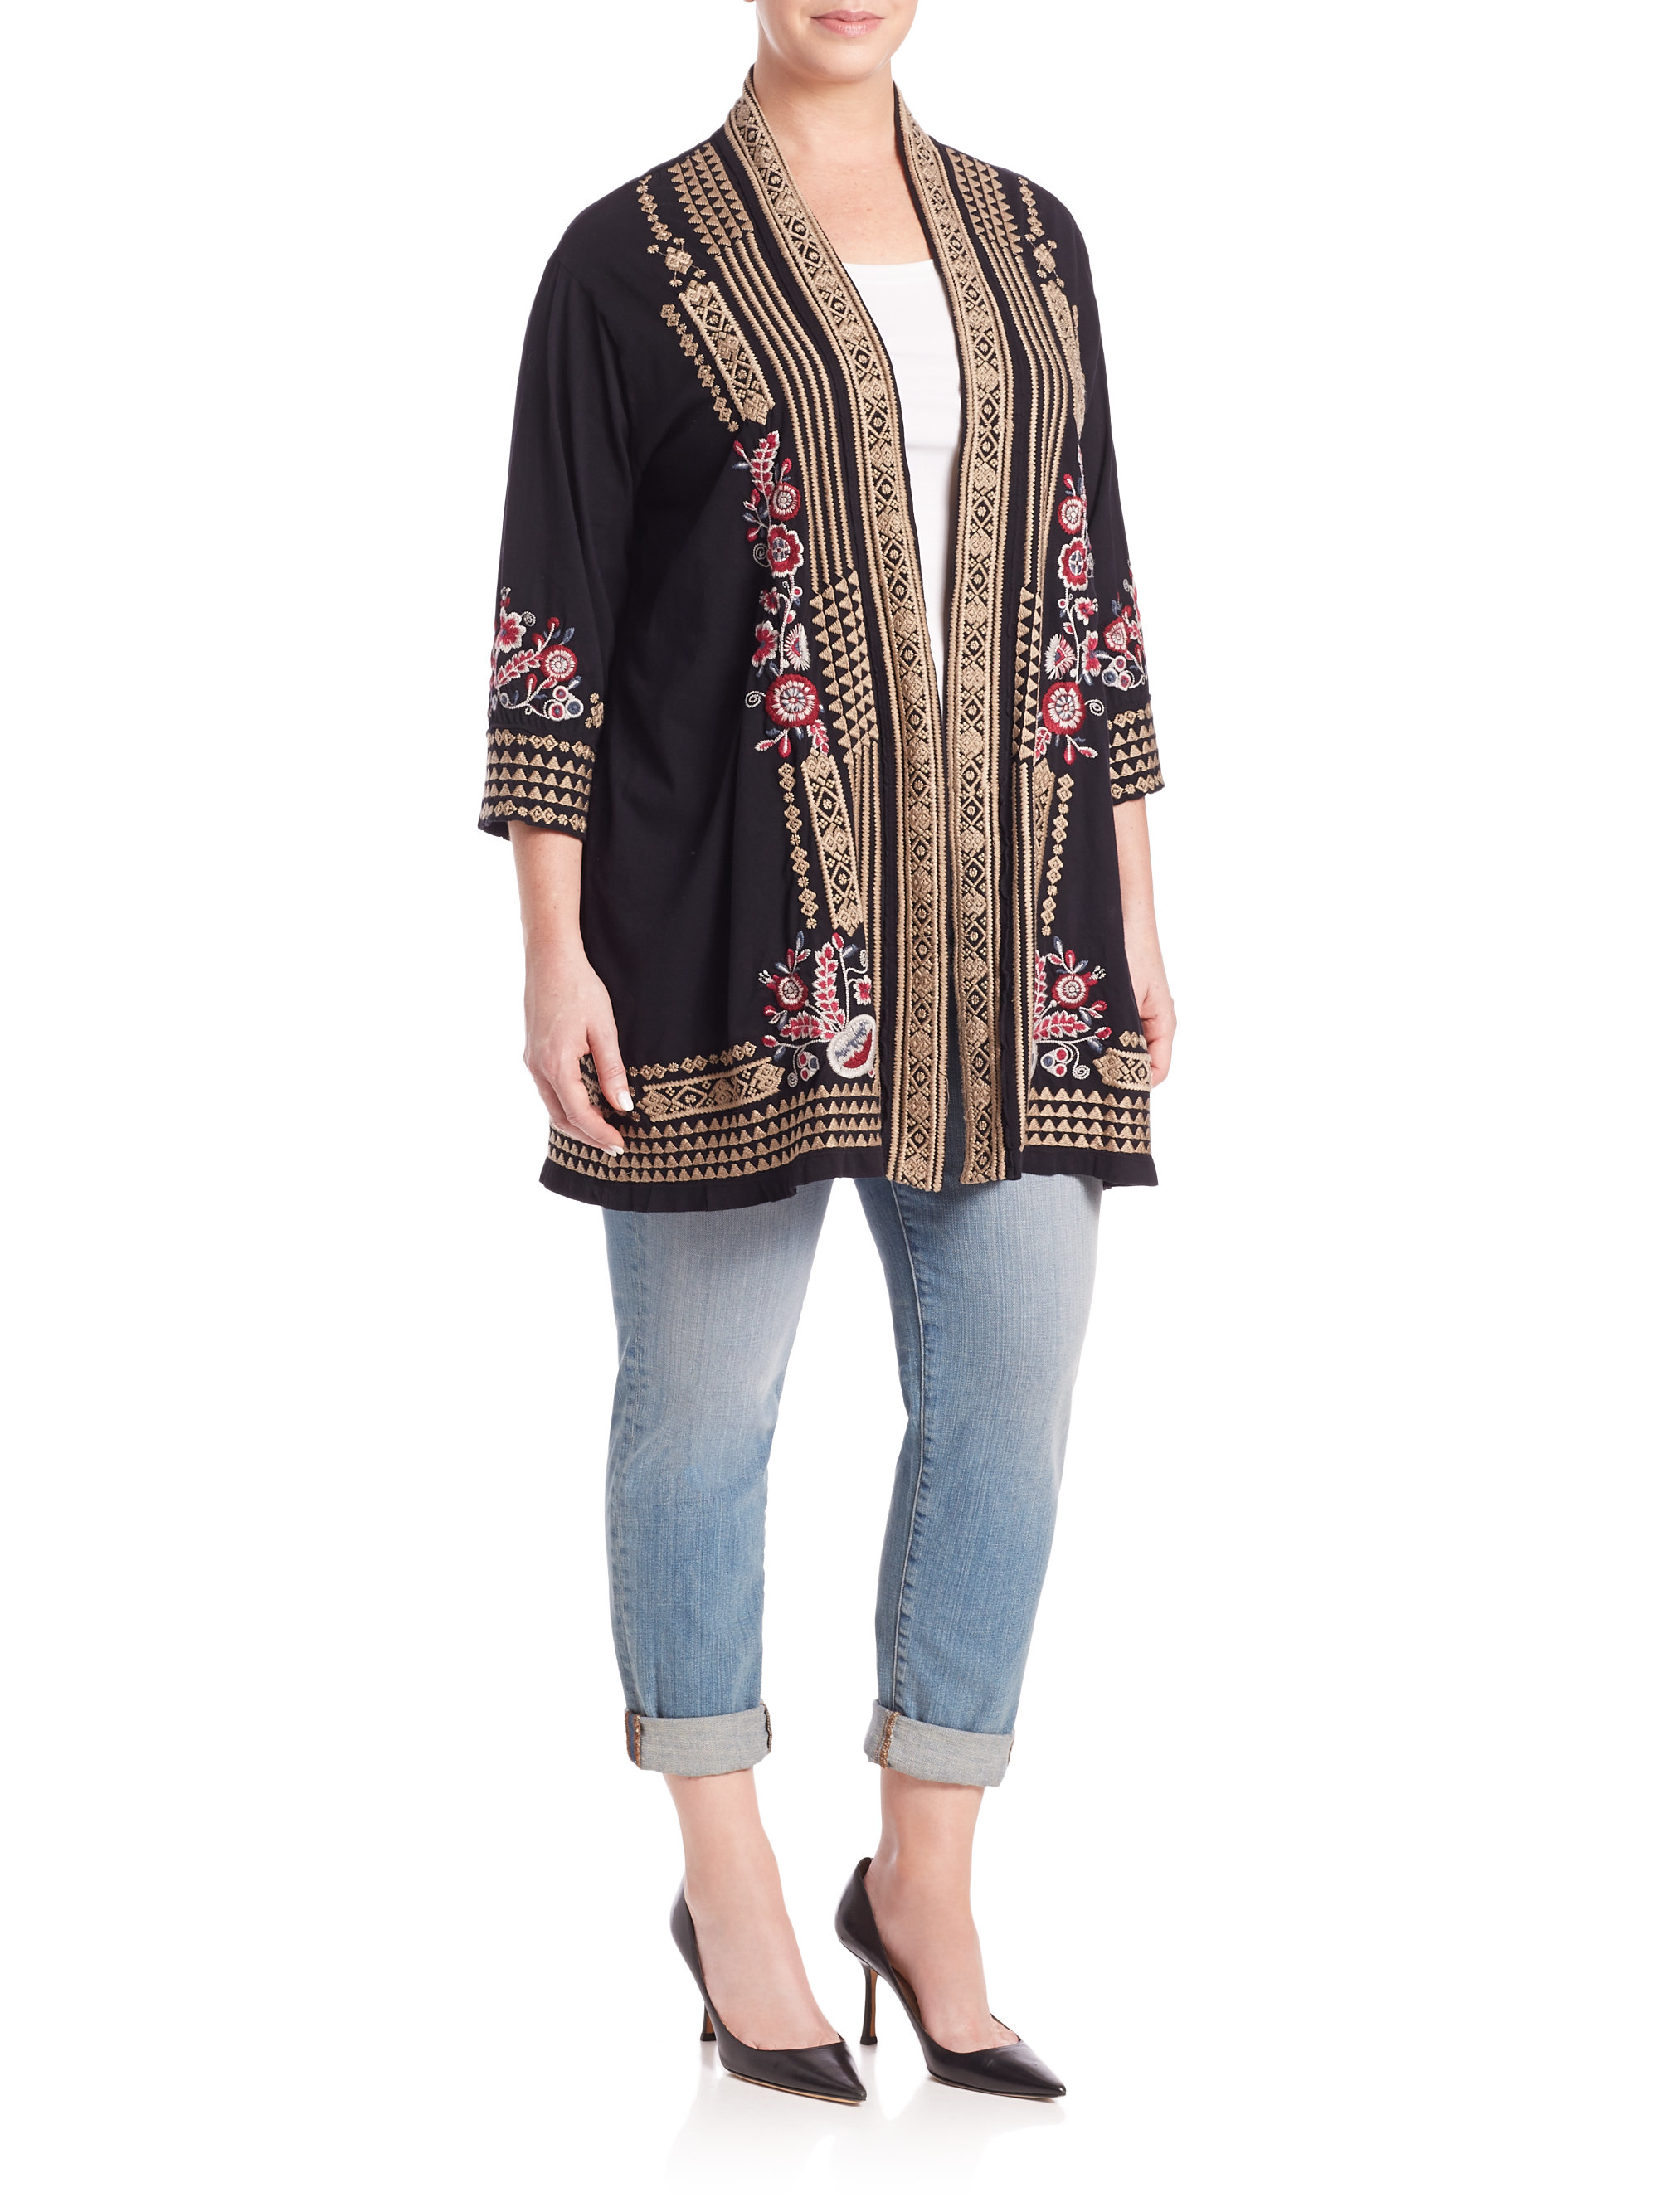 Johnny Was Izzy Embroidered Velvet Cardigan in Black - Lyst